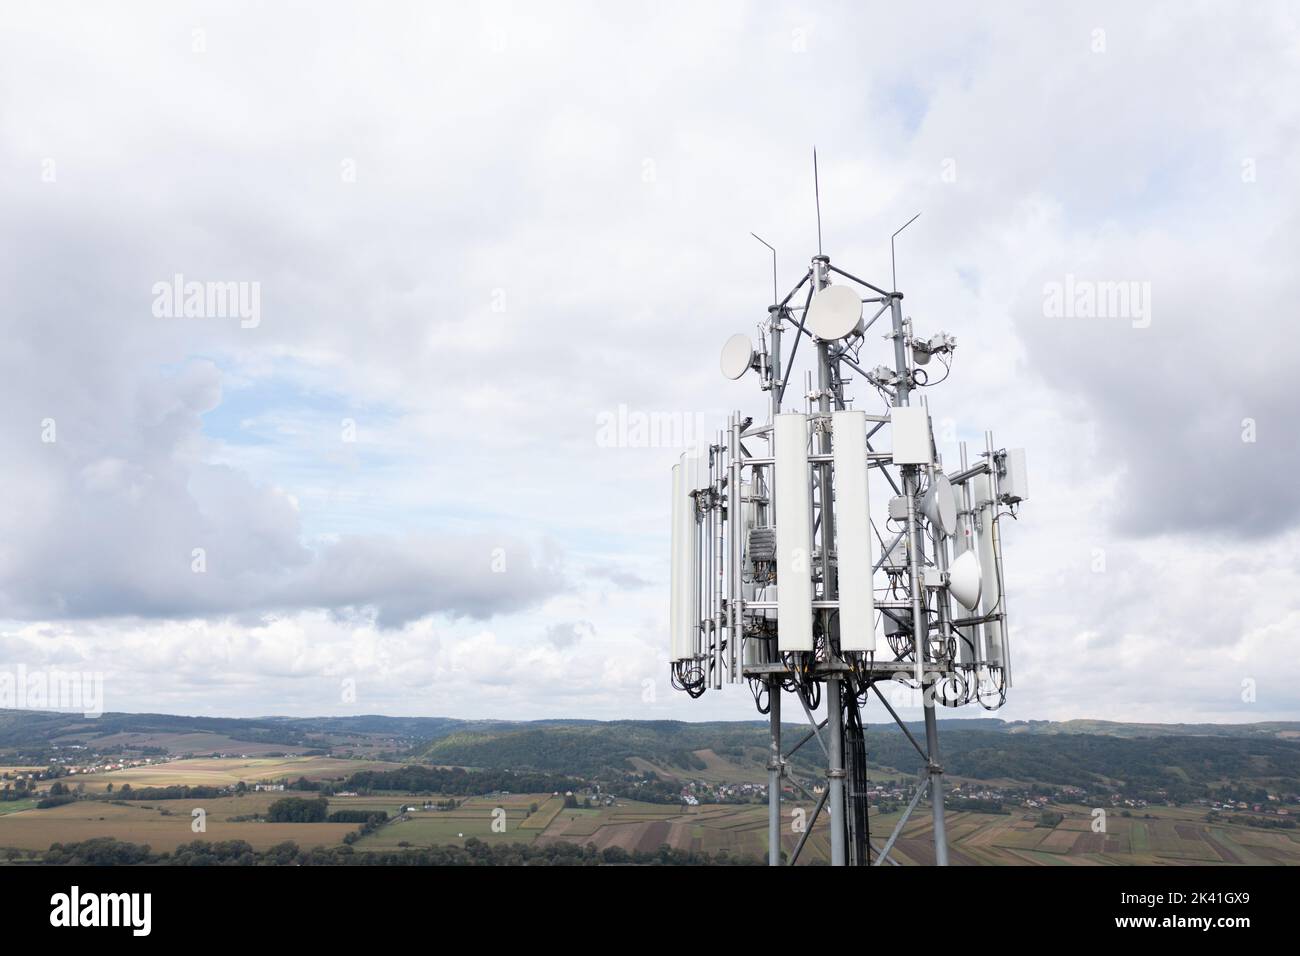 Cell tower carrying antennas of cellular networks GSM transmitter receiver against cloudy sky and landscape, Dynów, September 2022. Stock Photo